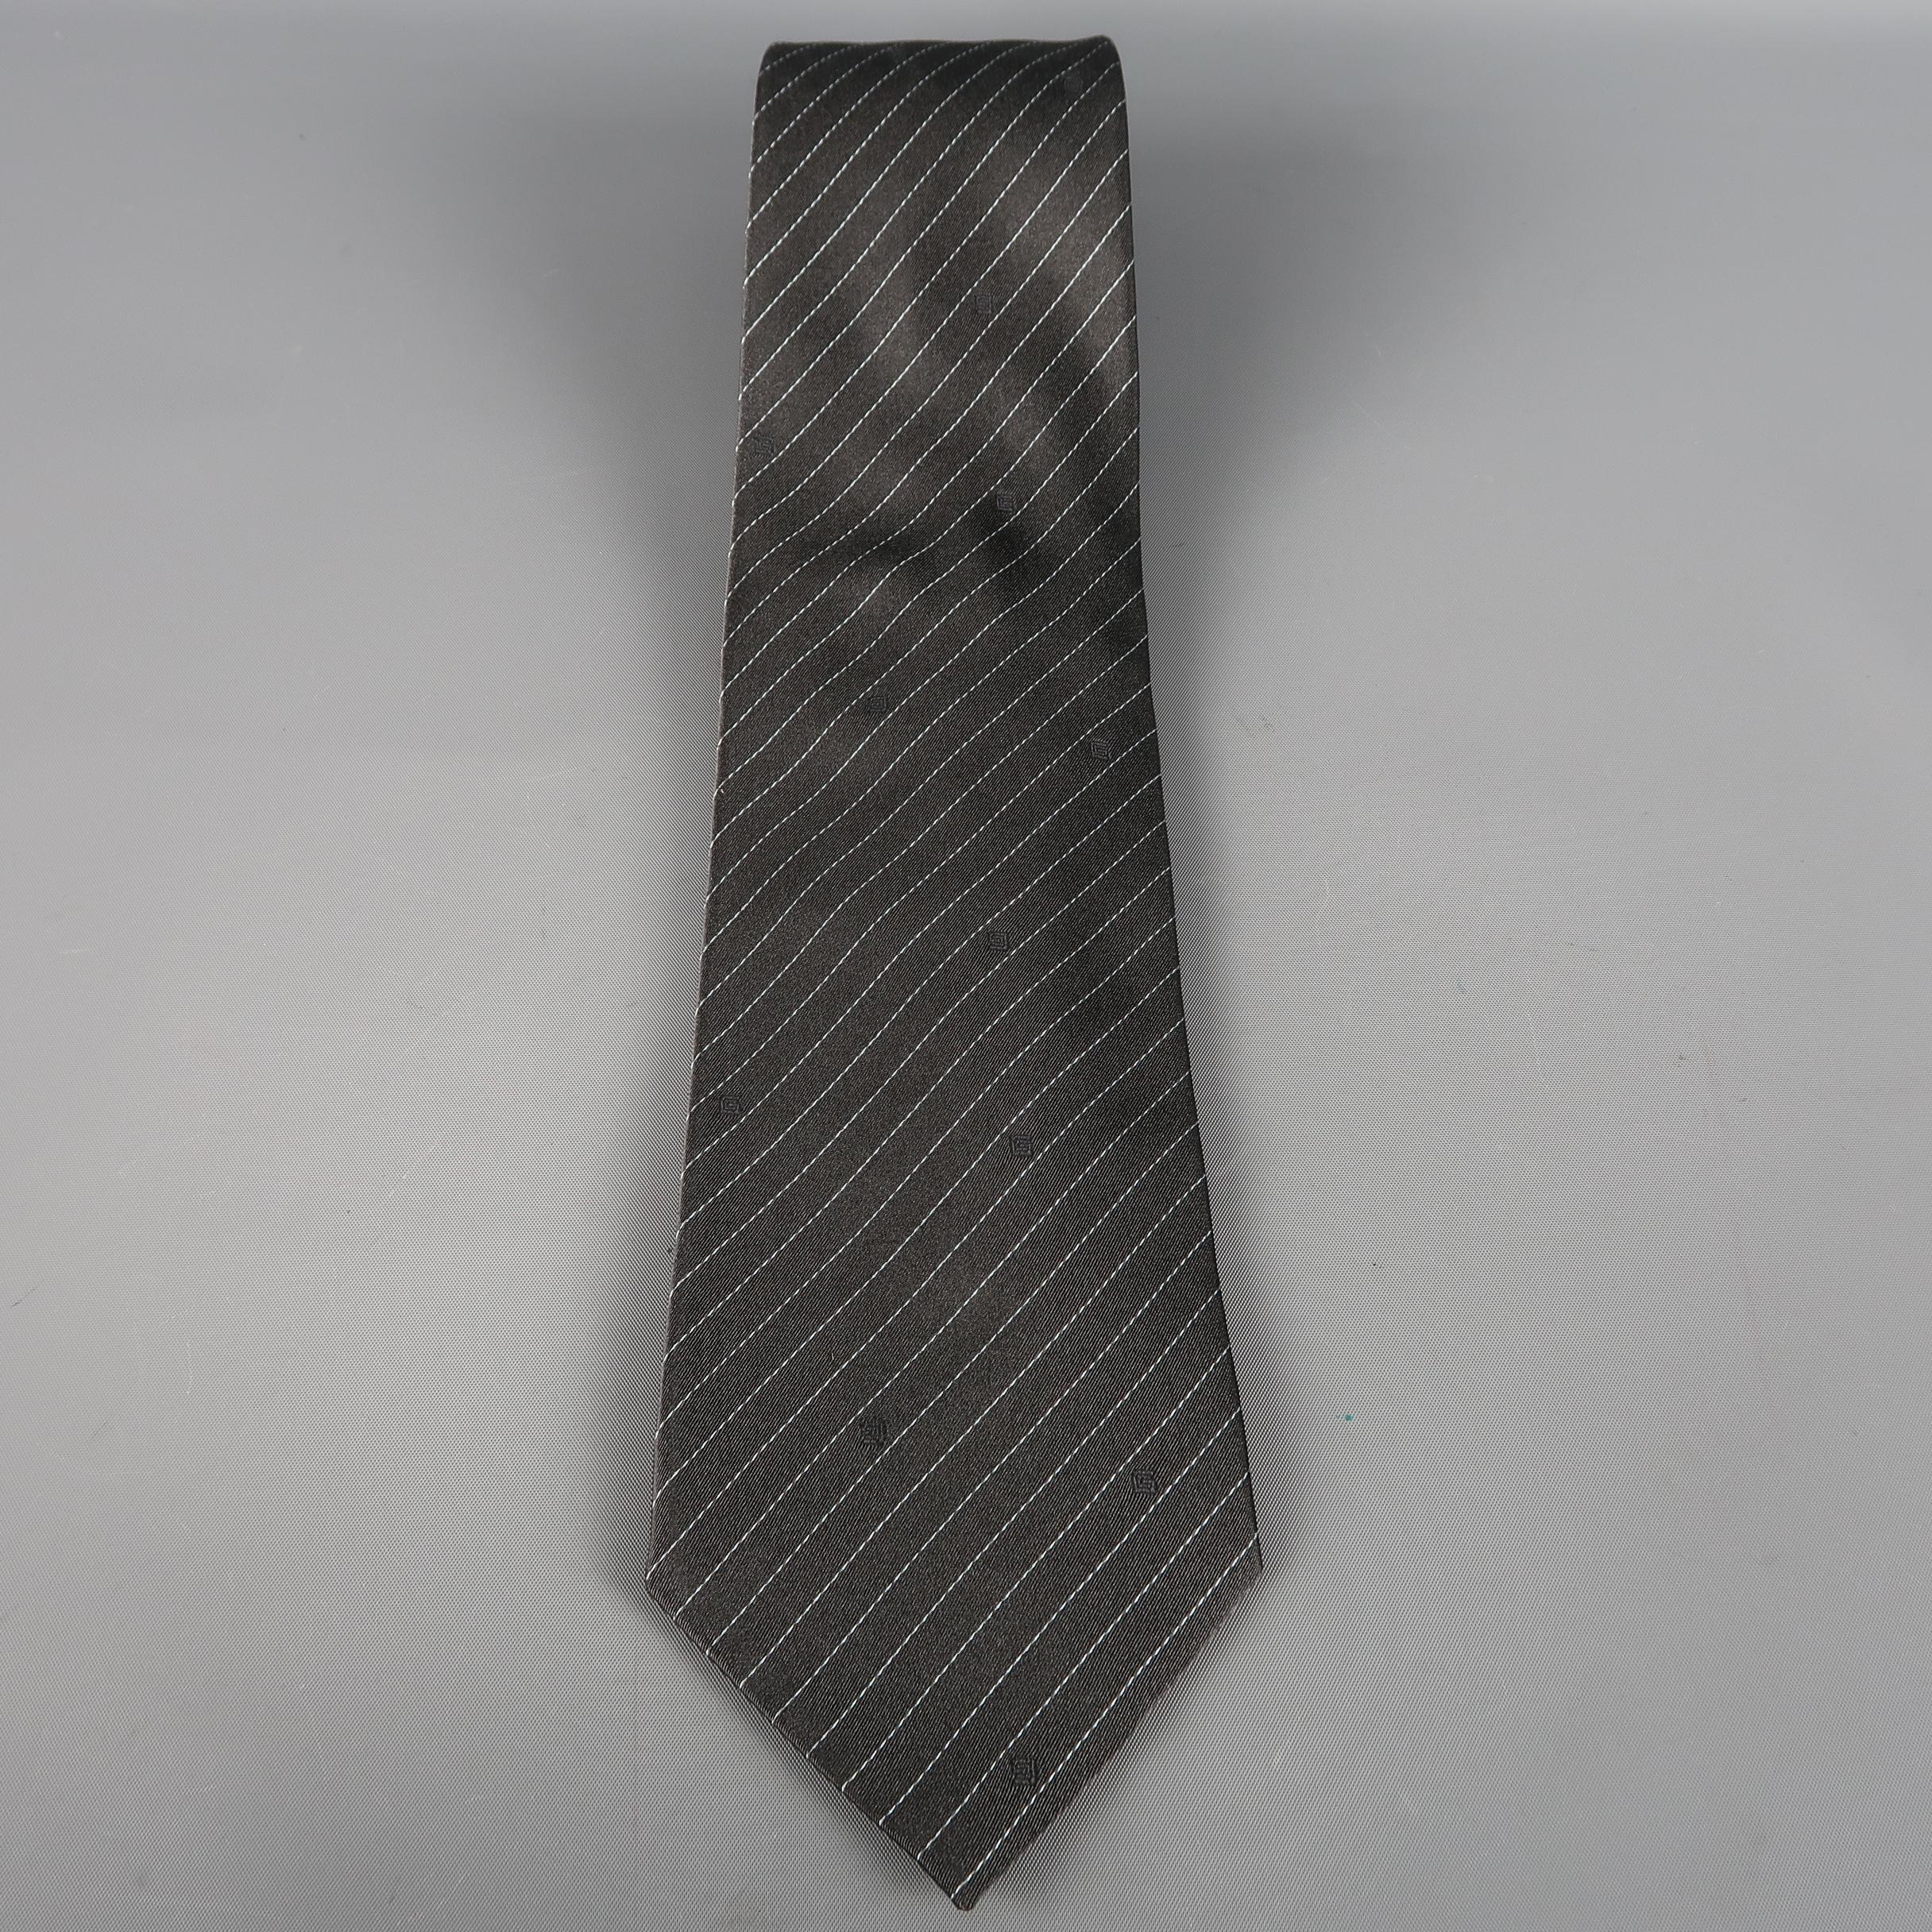 GUCCI tie come in dark gray silk  with all over diagonal silver stripes.  Small Gucci Logos (not stains). Made in Italy.
 
Excellent Pre-Owned Condition.
 
Width: 4 in.